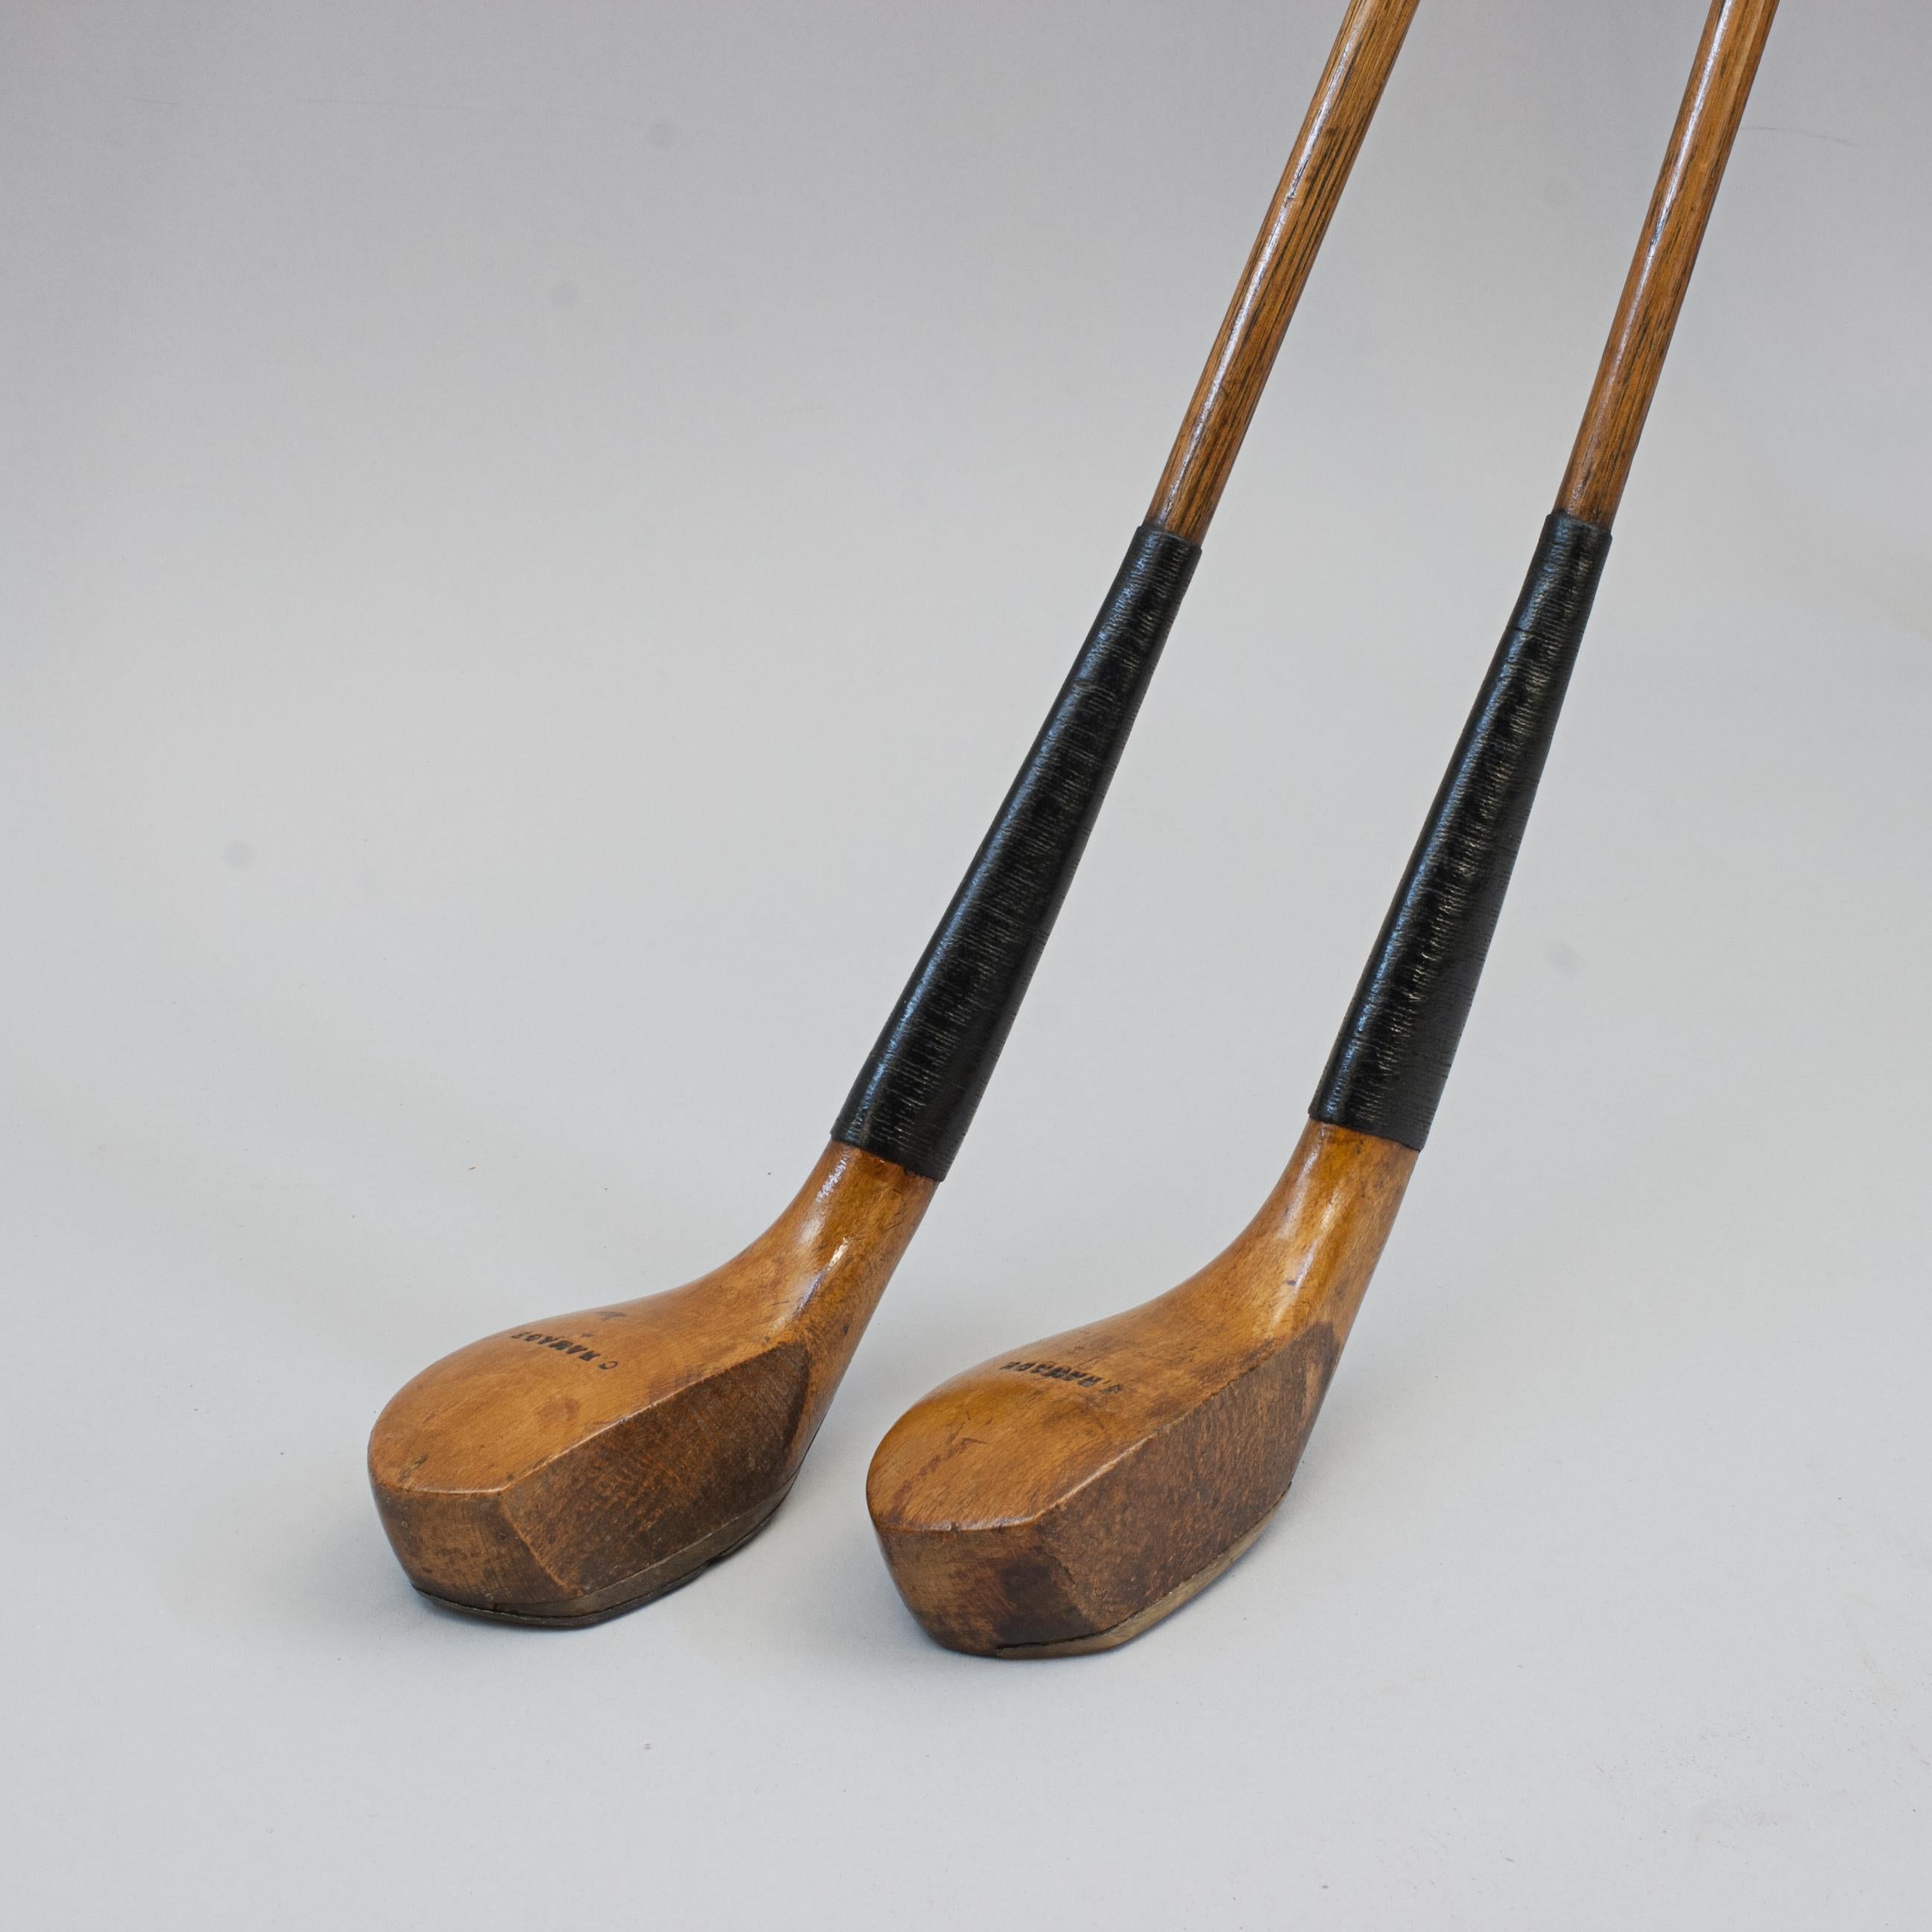 Antique Scared Head Charles Ramage Woods.
An elegant pair of transitional scared head beech wood hickory golf clubs by Charles Ramage, Brighton & Hove Golf Club (1888 - 1902). This great looking pair of usable scared head clubs, driver and brassie,